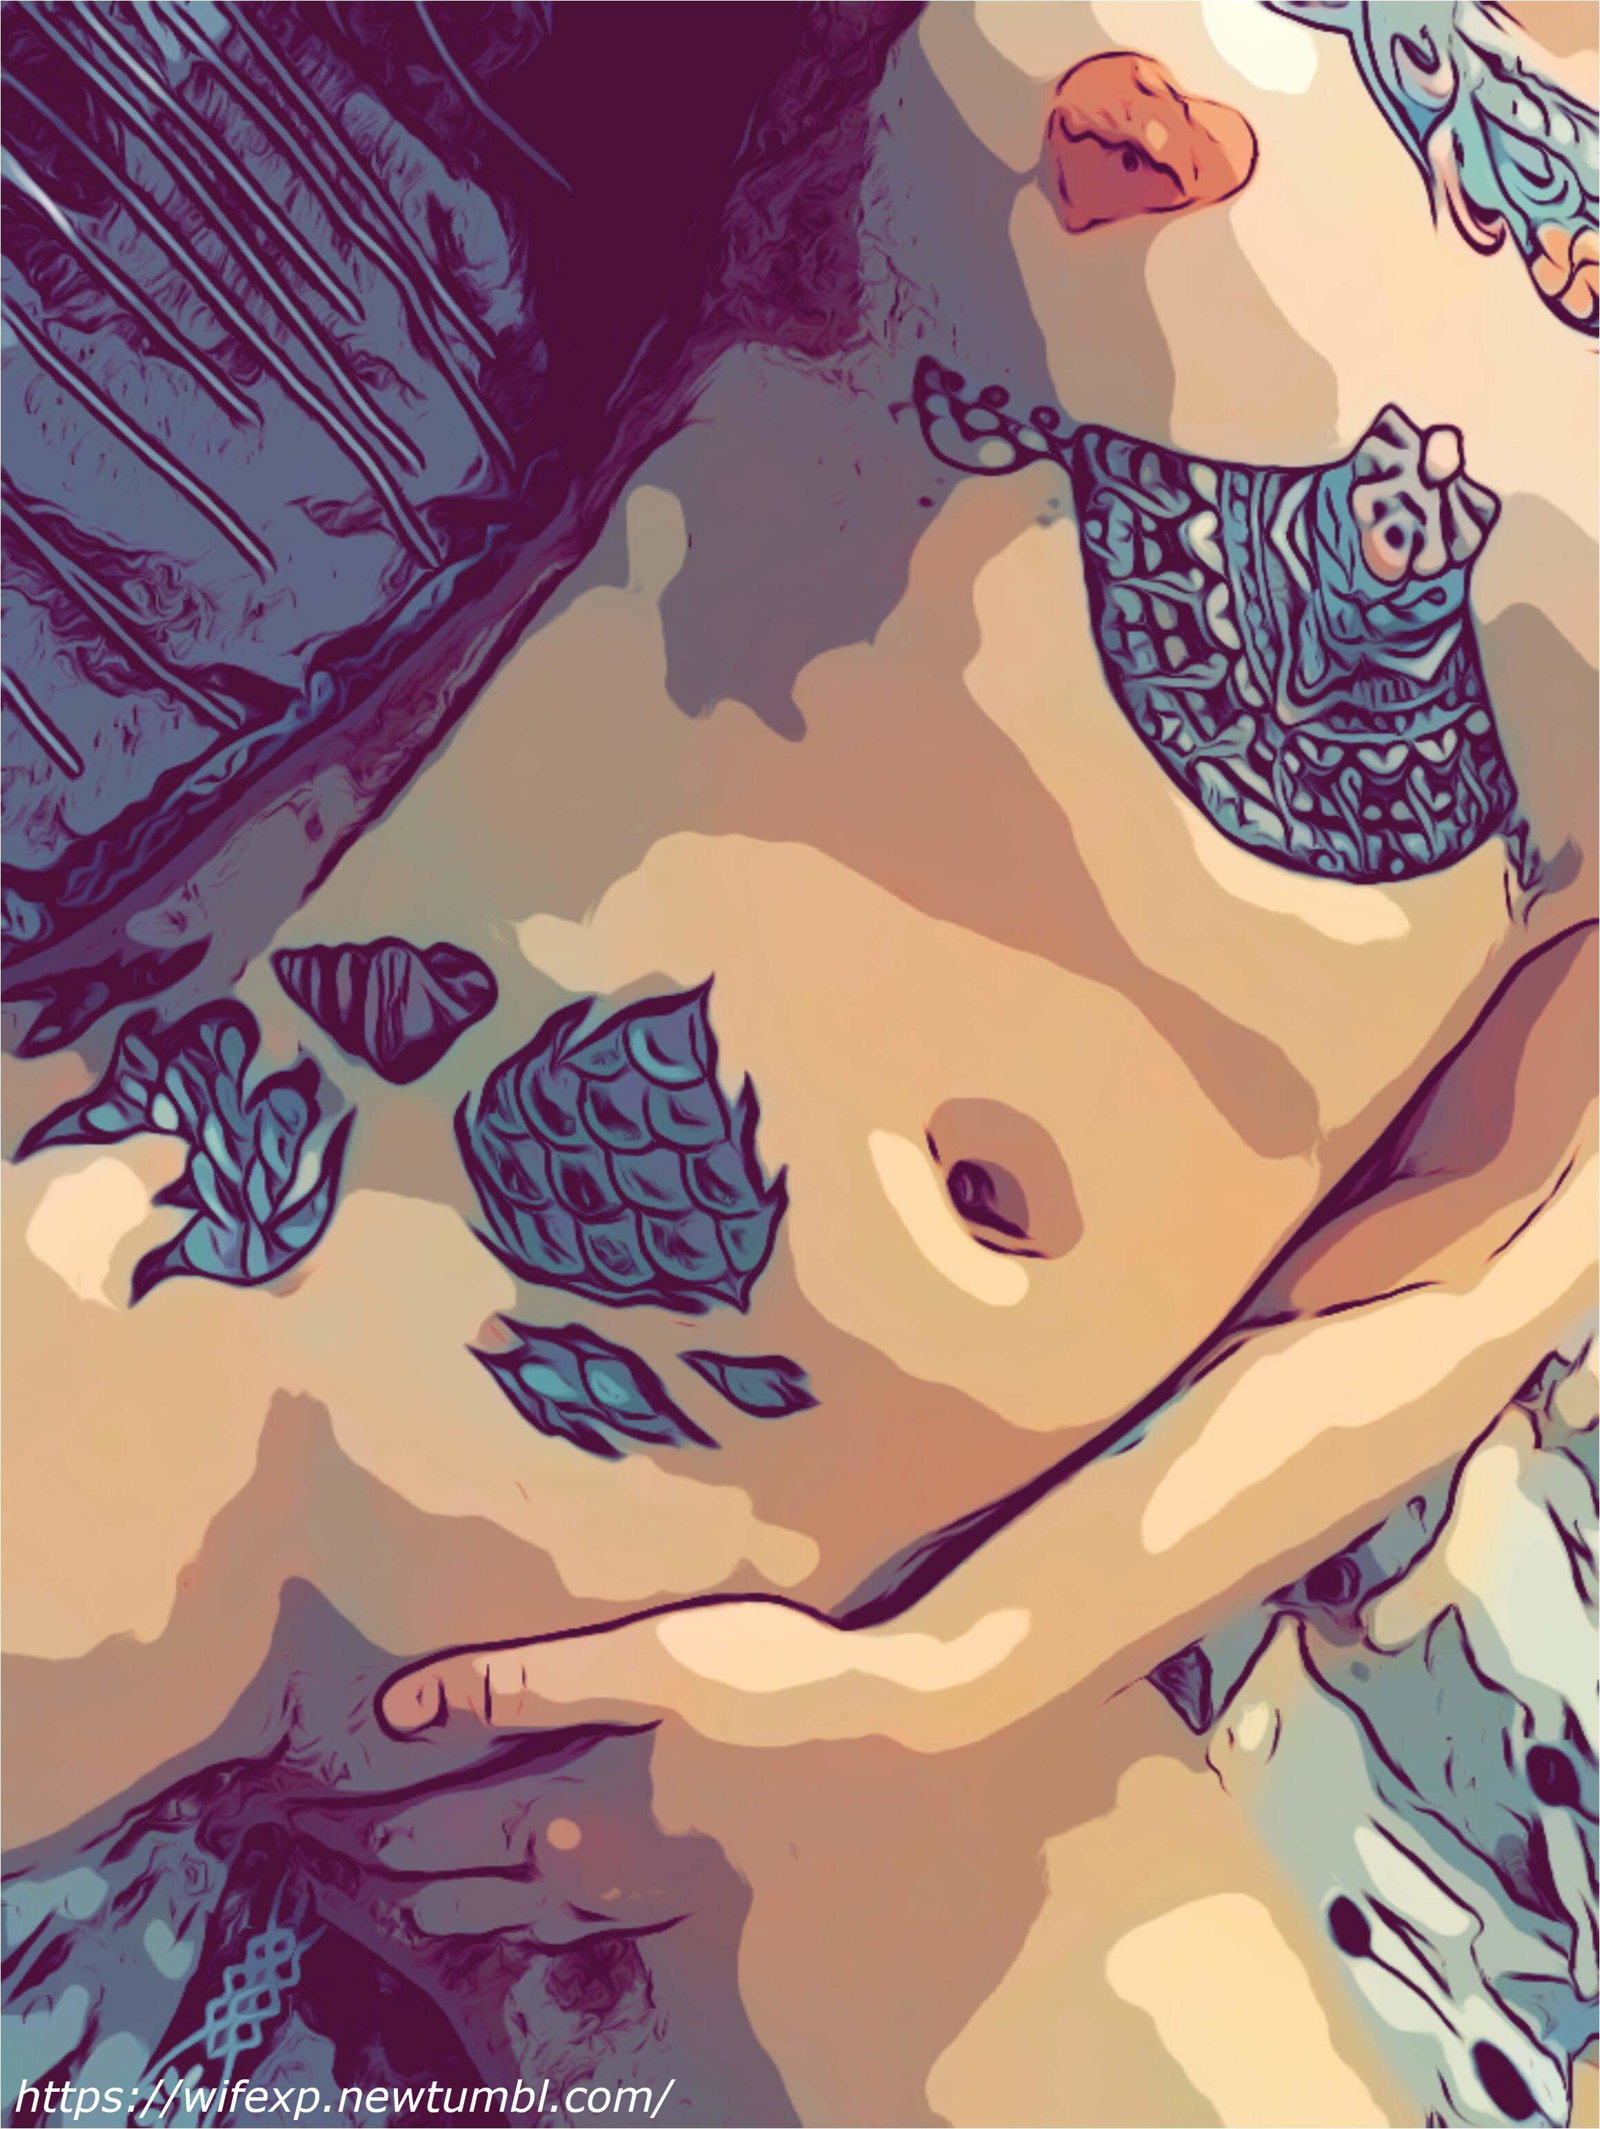 Photo by wifexp with the username @wifexp,  March 29, 2020 at 7:26 PM. The post is about the topic Amateurs and the text says 'Filters...

#wife #wifexp #amateur #homemade #selfie #naked #nude 
#filtered #tattoo #tattoos #NSFW'